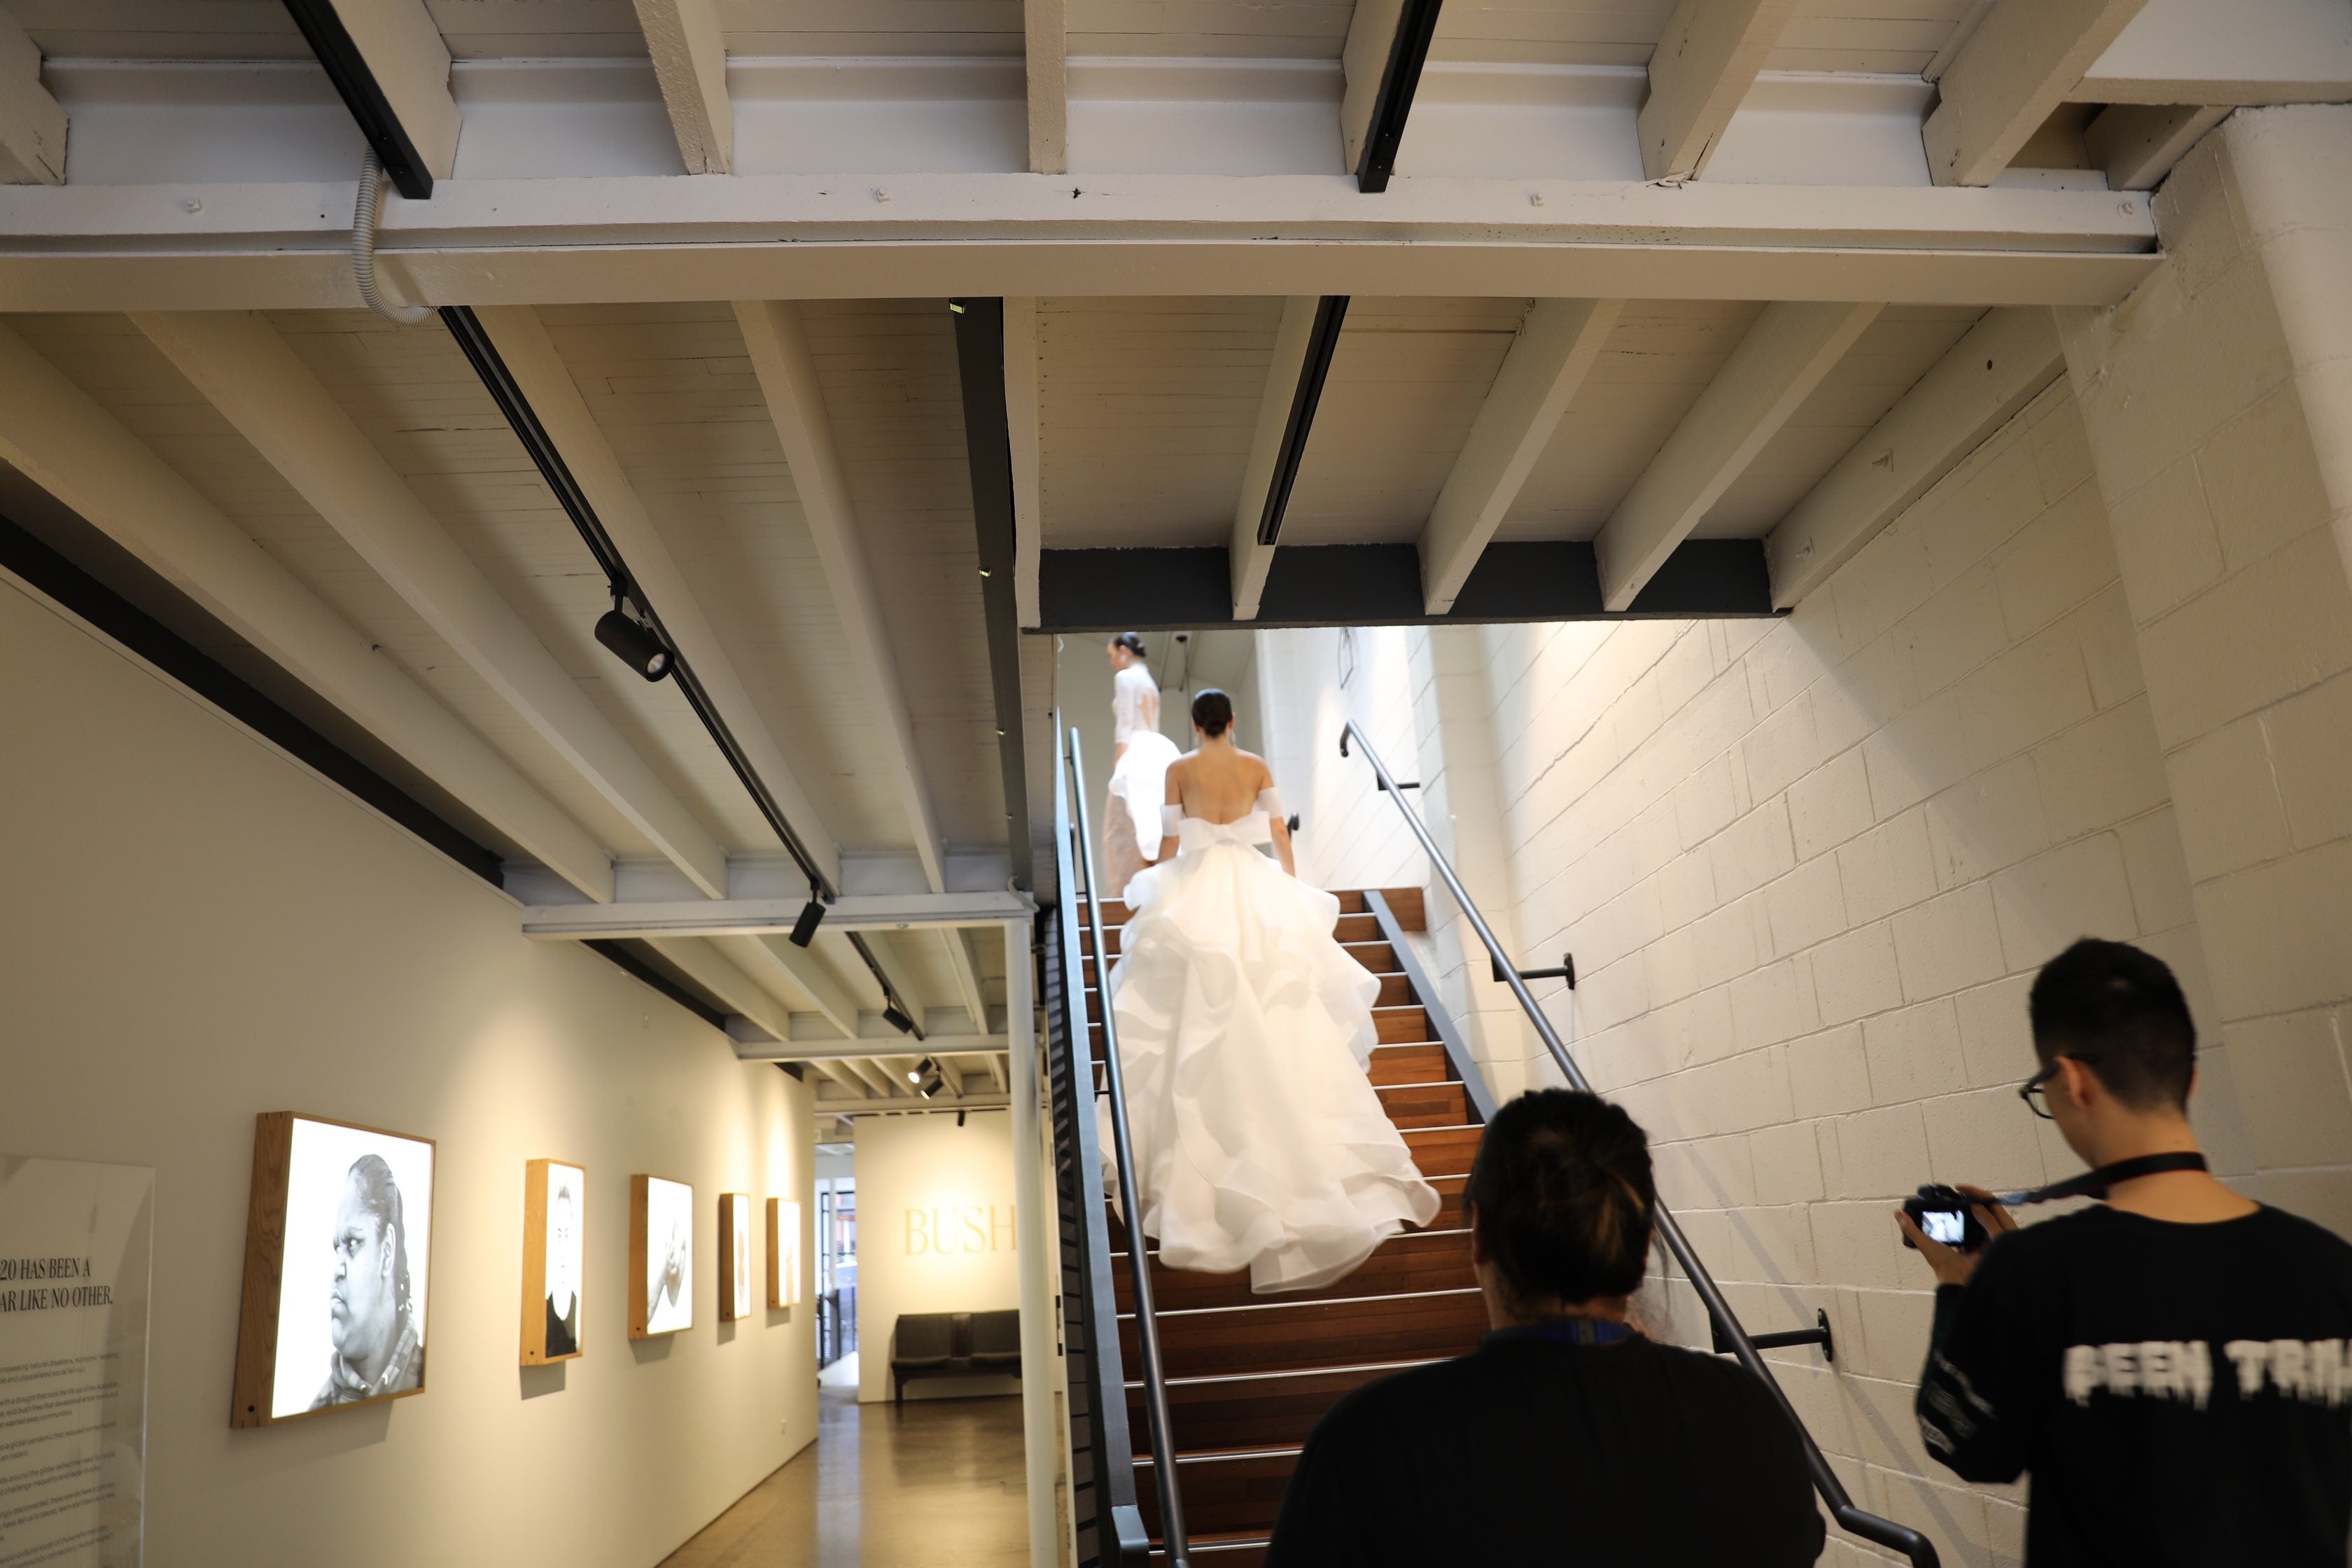 two women in wedding dresses walking up stairs while photographers follow them with cameras